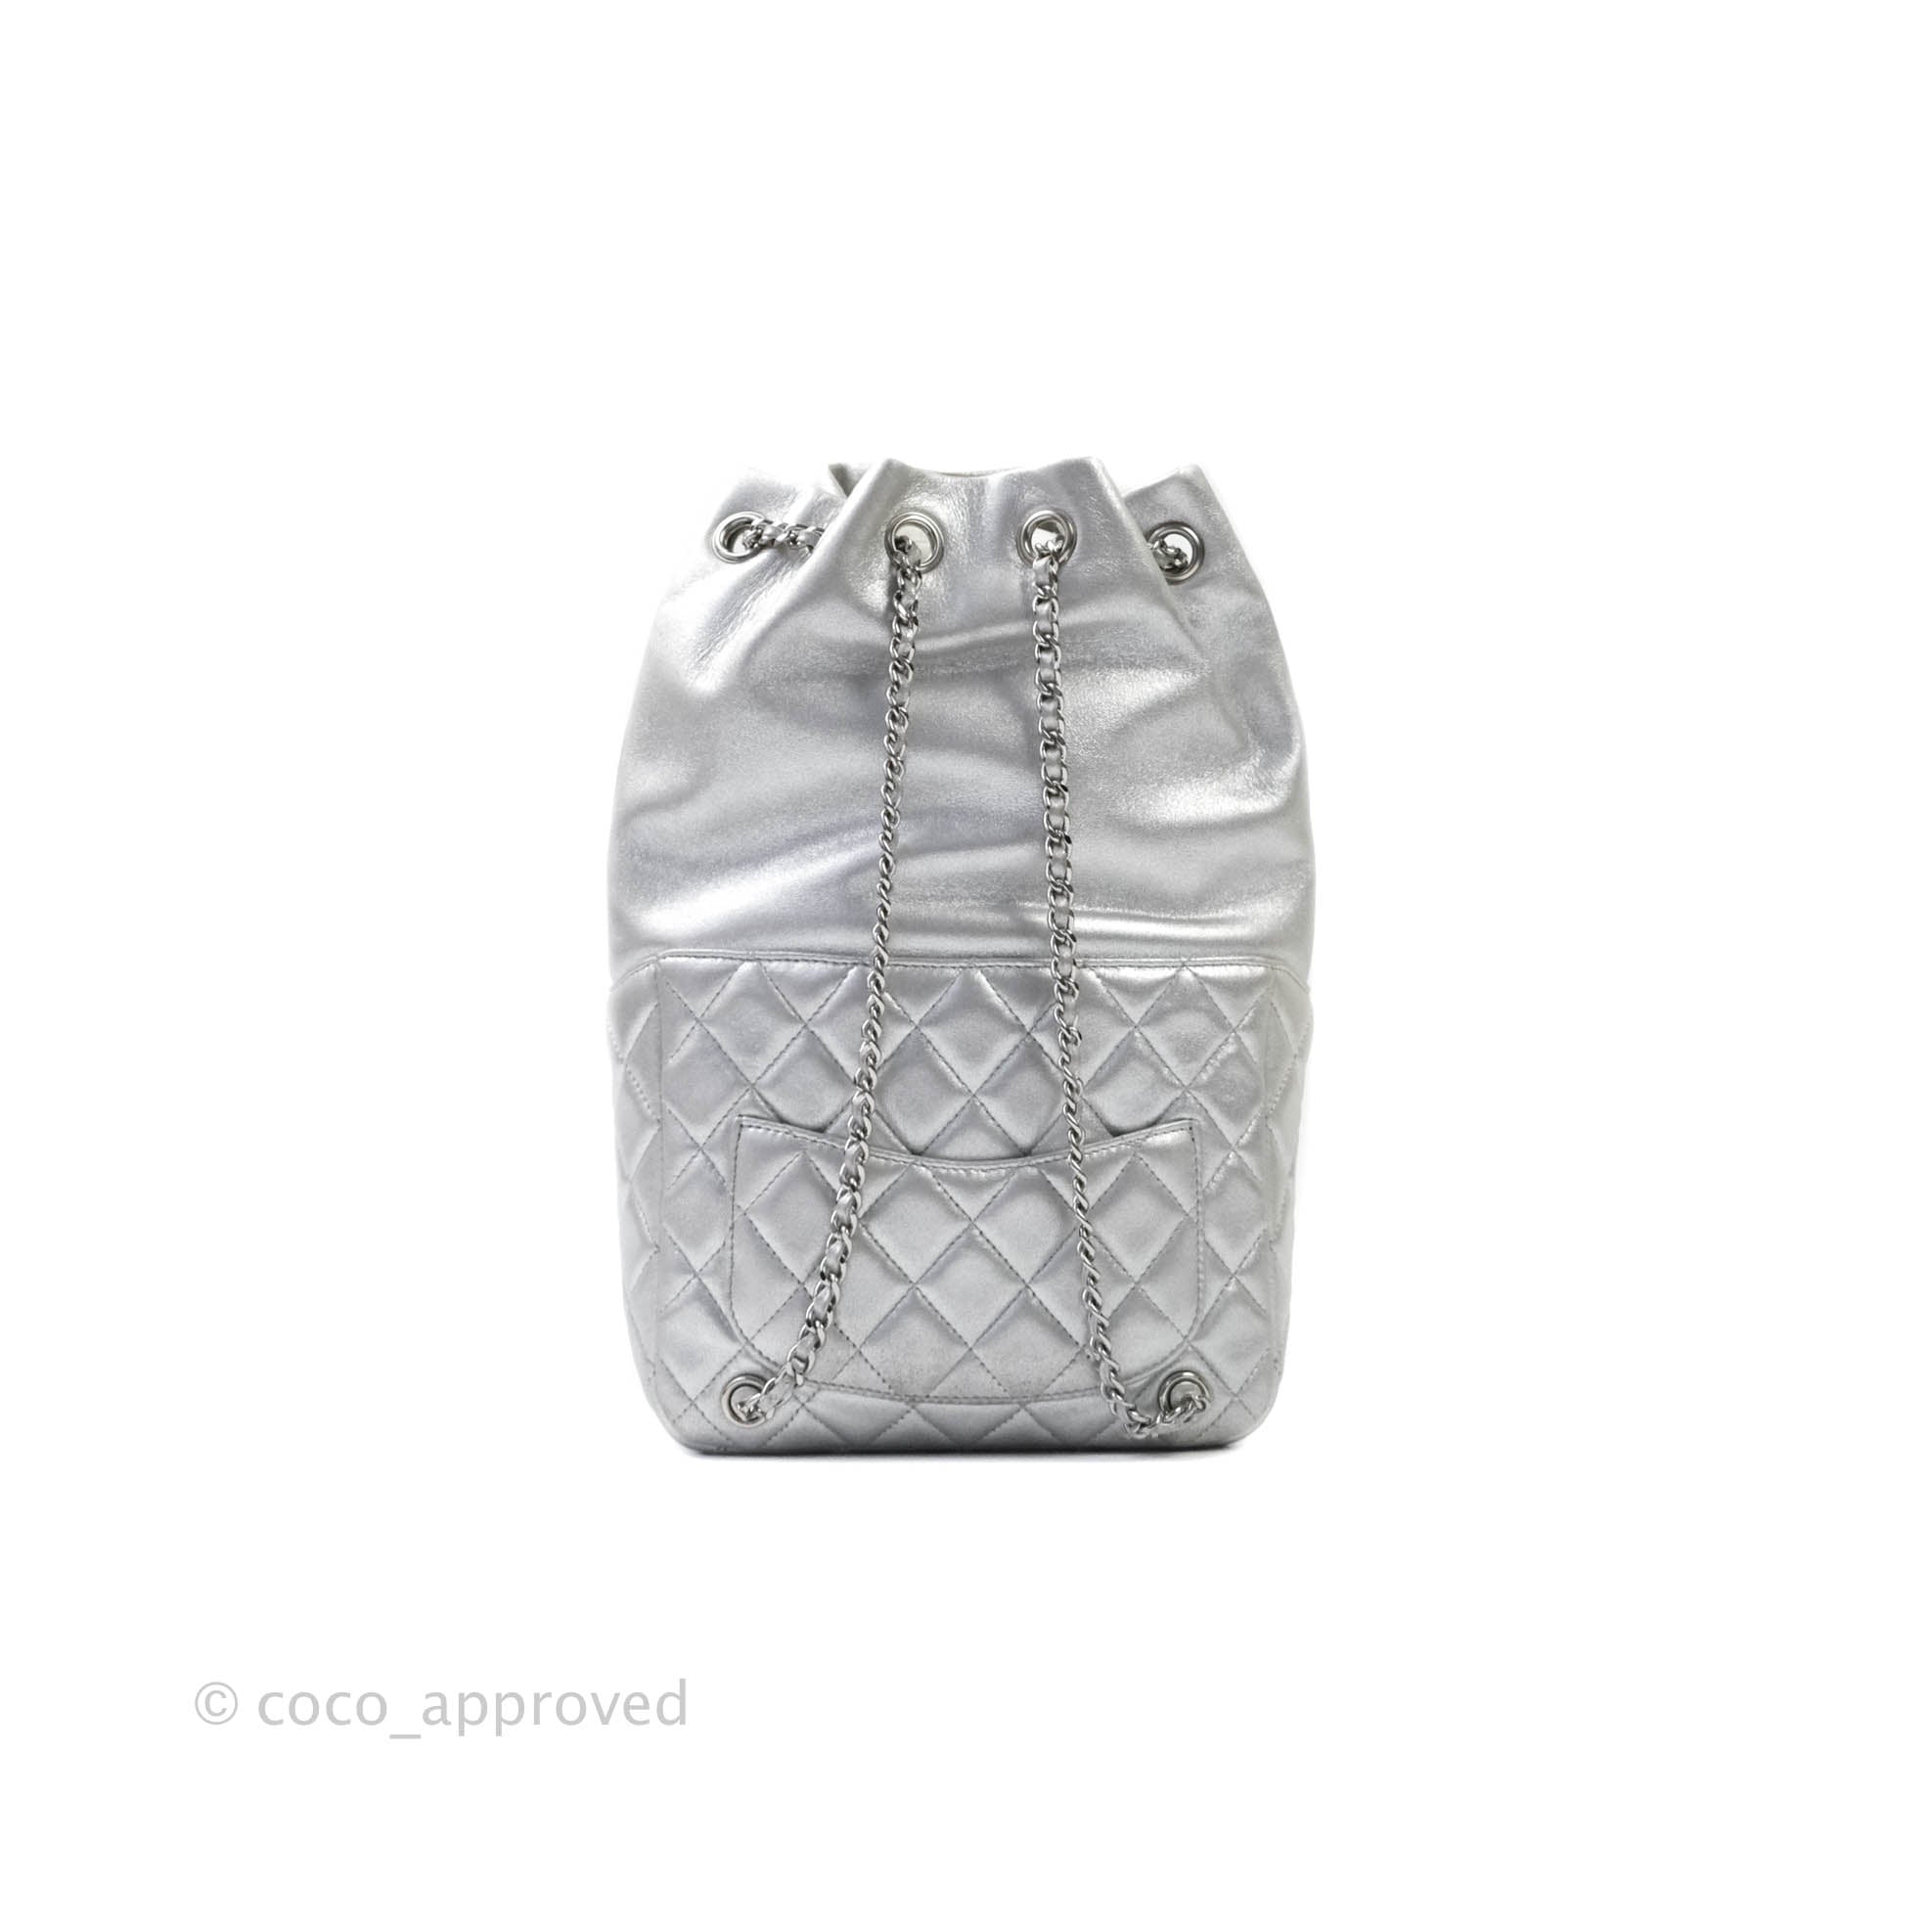 CHANEL, Bags, Chanel Metallic Silver Distressed Lambskin Quilted Seoul  Small Backpack Italy